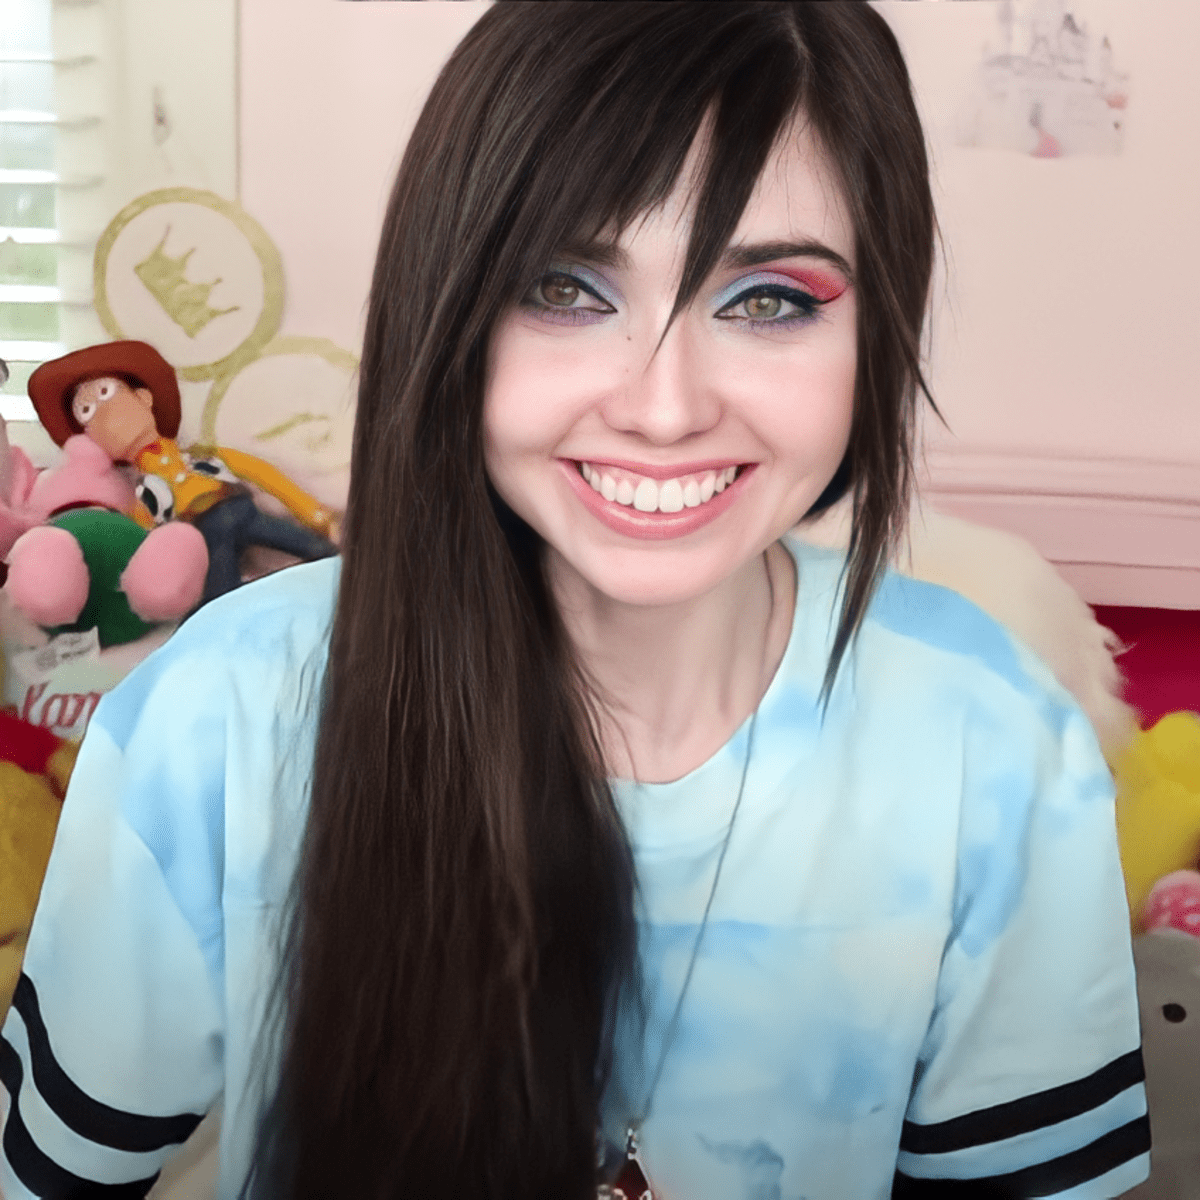 grave sneen Tag telefonen Journal Entry: Eugenia Cooney - HubPages